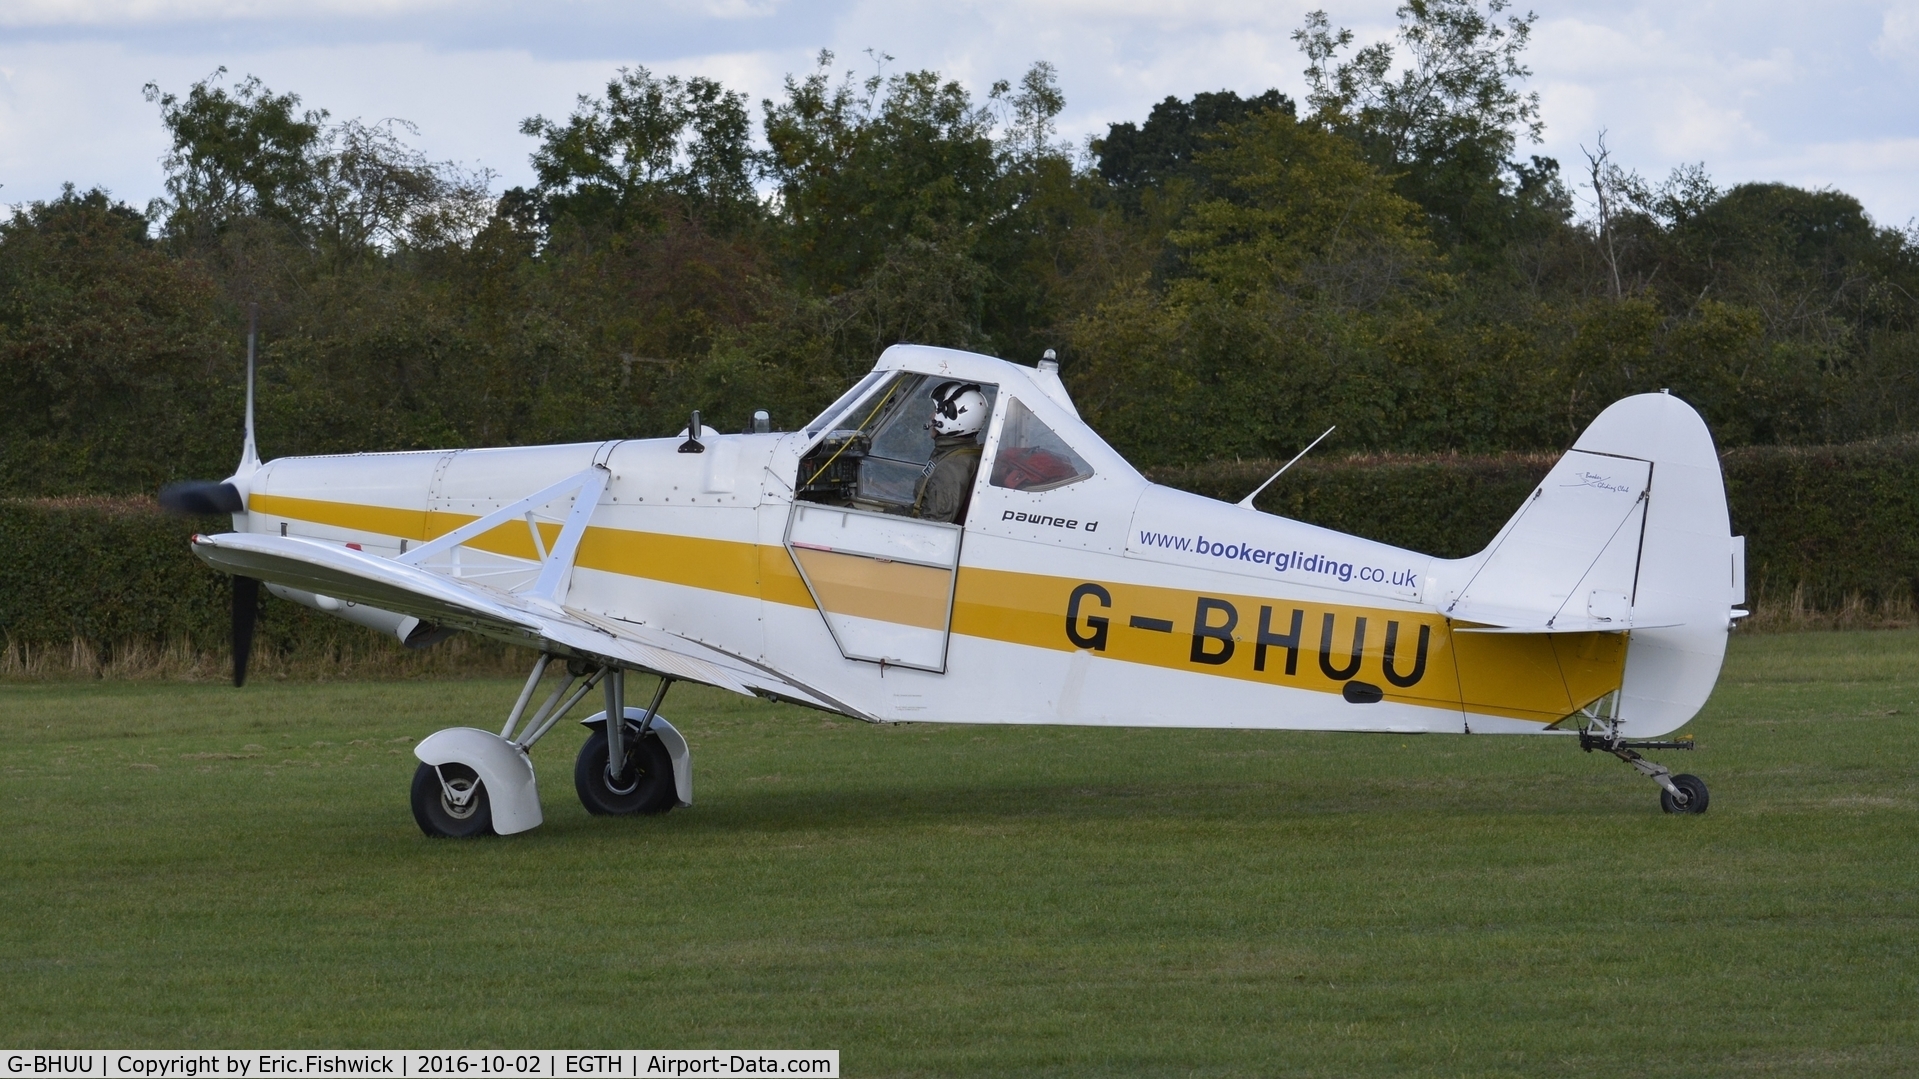 G-BHUU, 1980 Piper PA-25-235 Pawnee C/N 25-8056035, 1. G-BHUU returning from a mission at Shuttleworth Collection's magnificent 'Season Finale,' October, 2016.